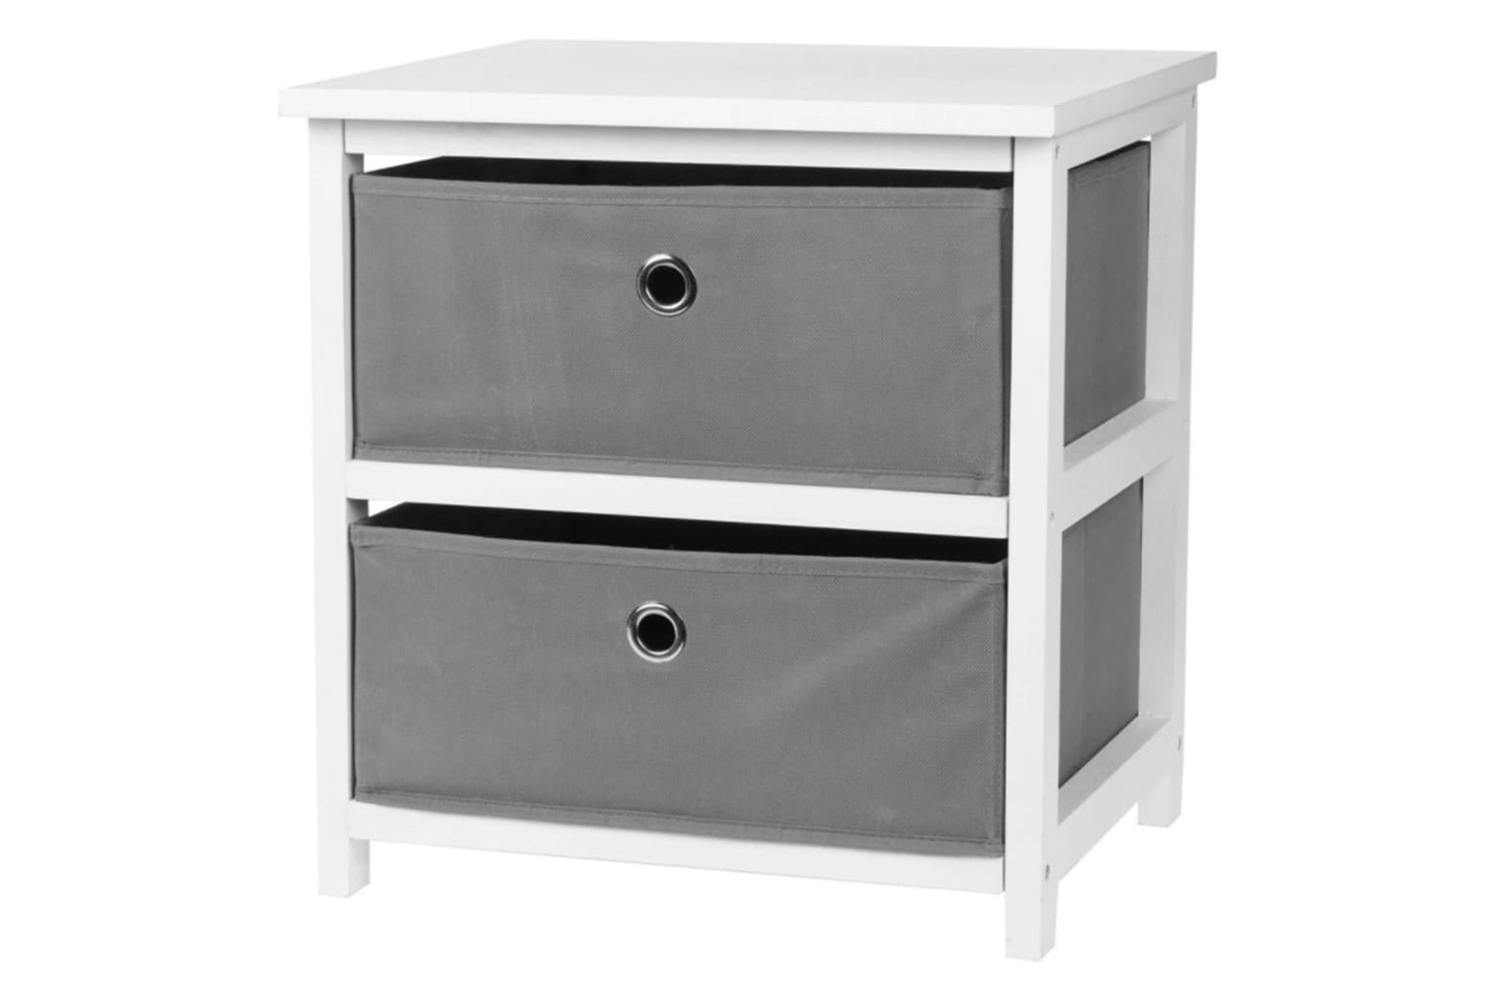 H&s Collection 441895 Storage Cabinet With 2 Drawers Mdf